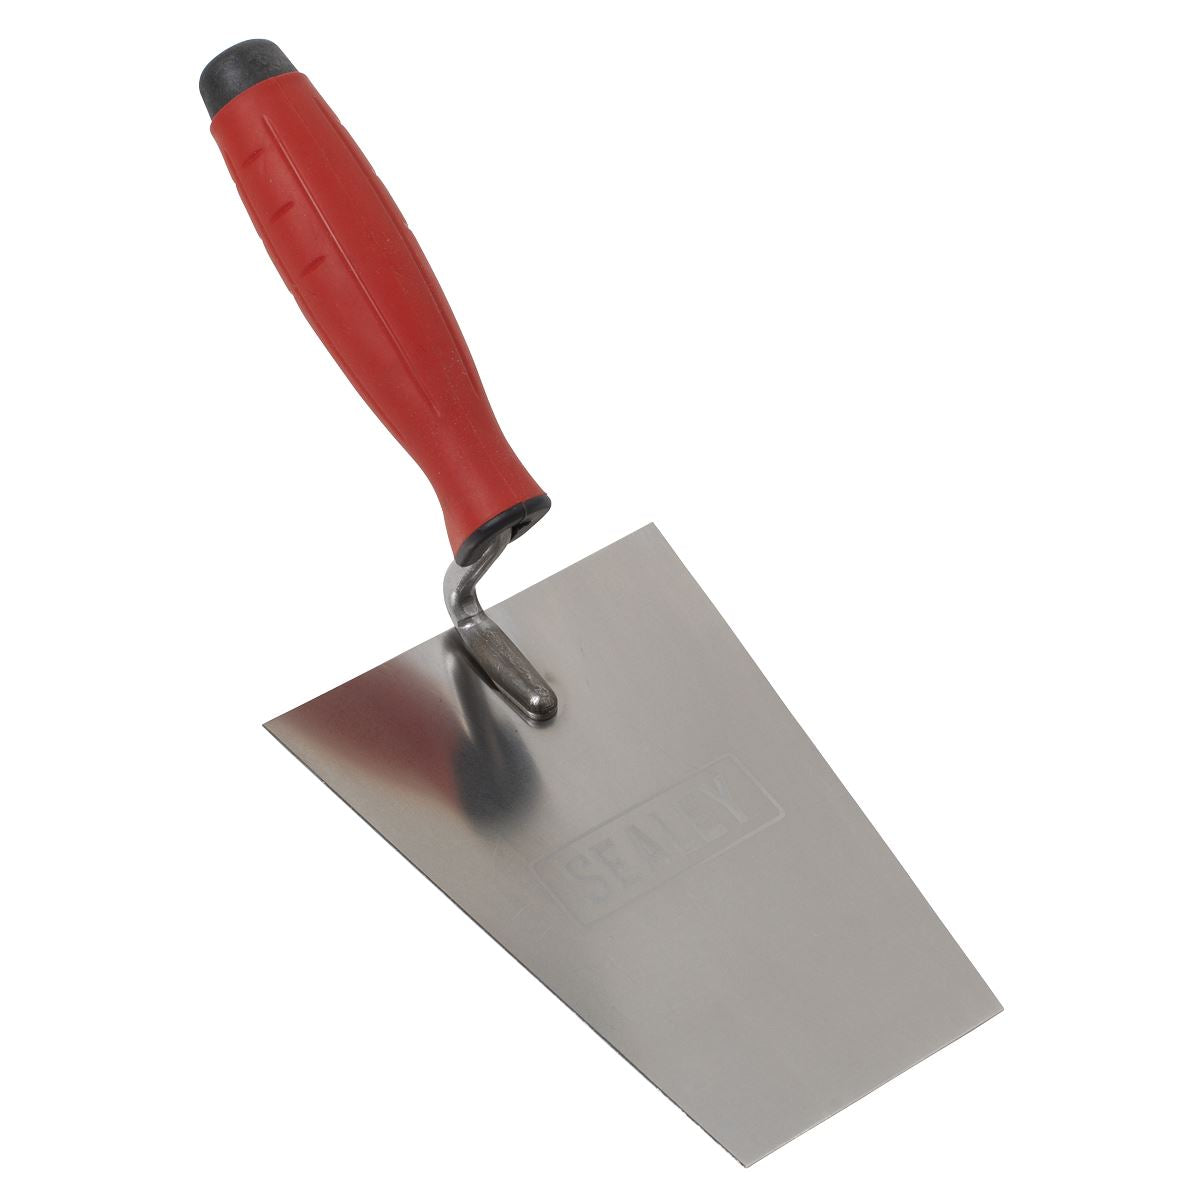 Sealey Stainless Steel Masonry Trowel - Rubber Handle - 160mm